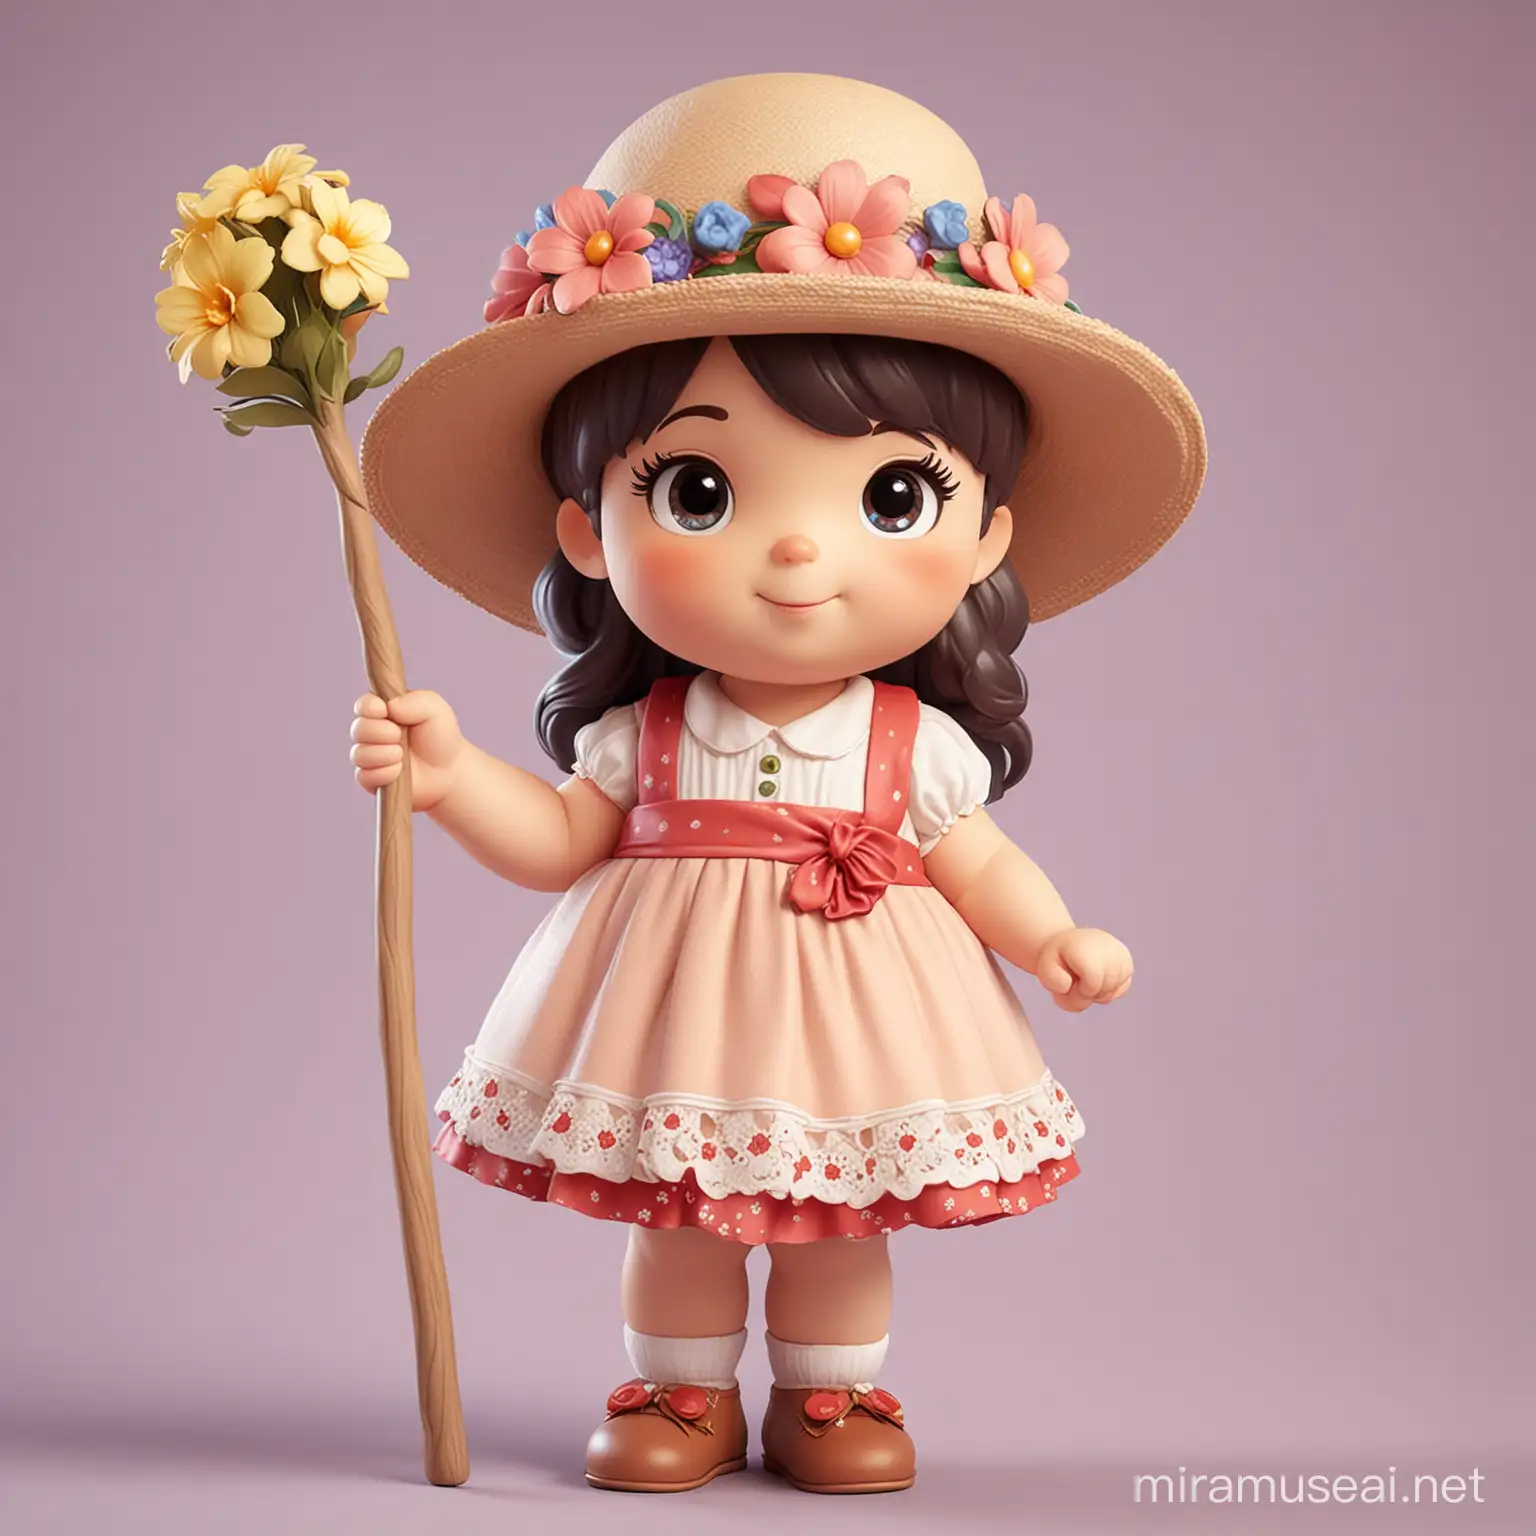 Adorable Little Girl with Stick and Flowers Mascot